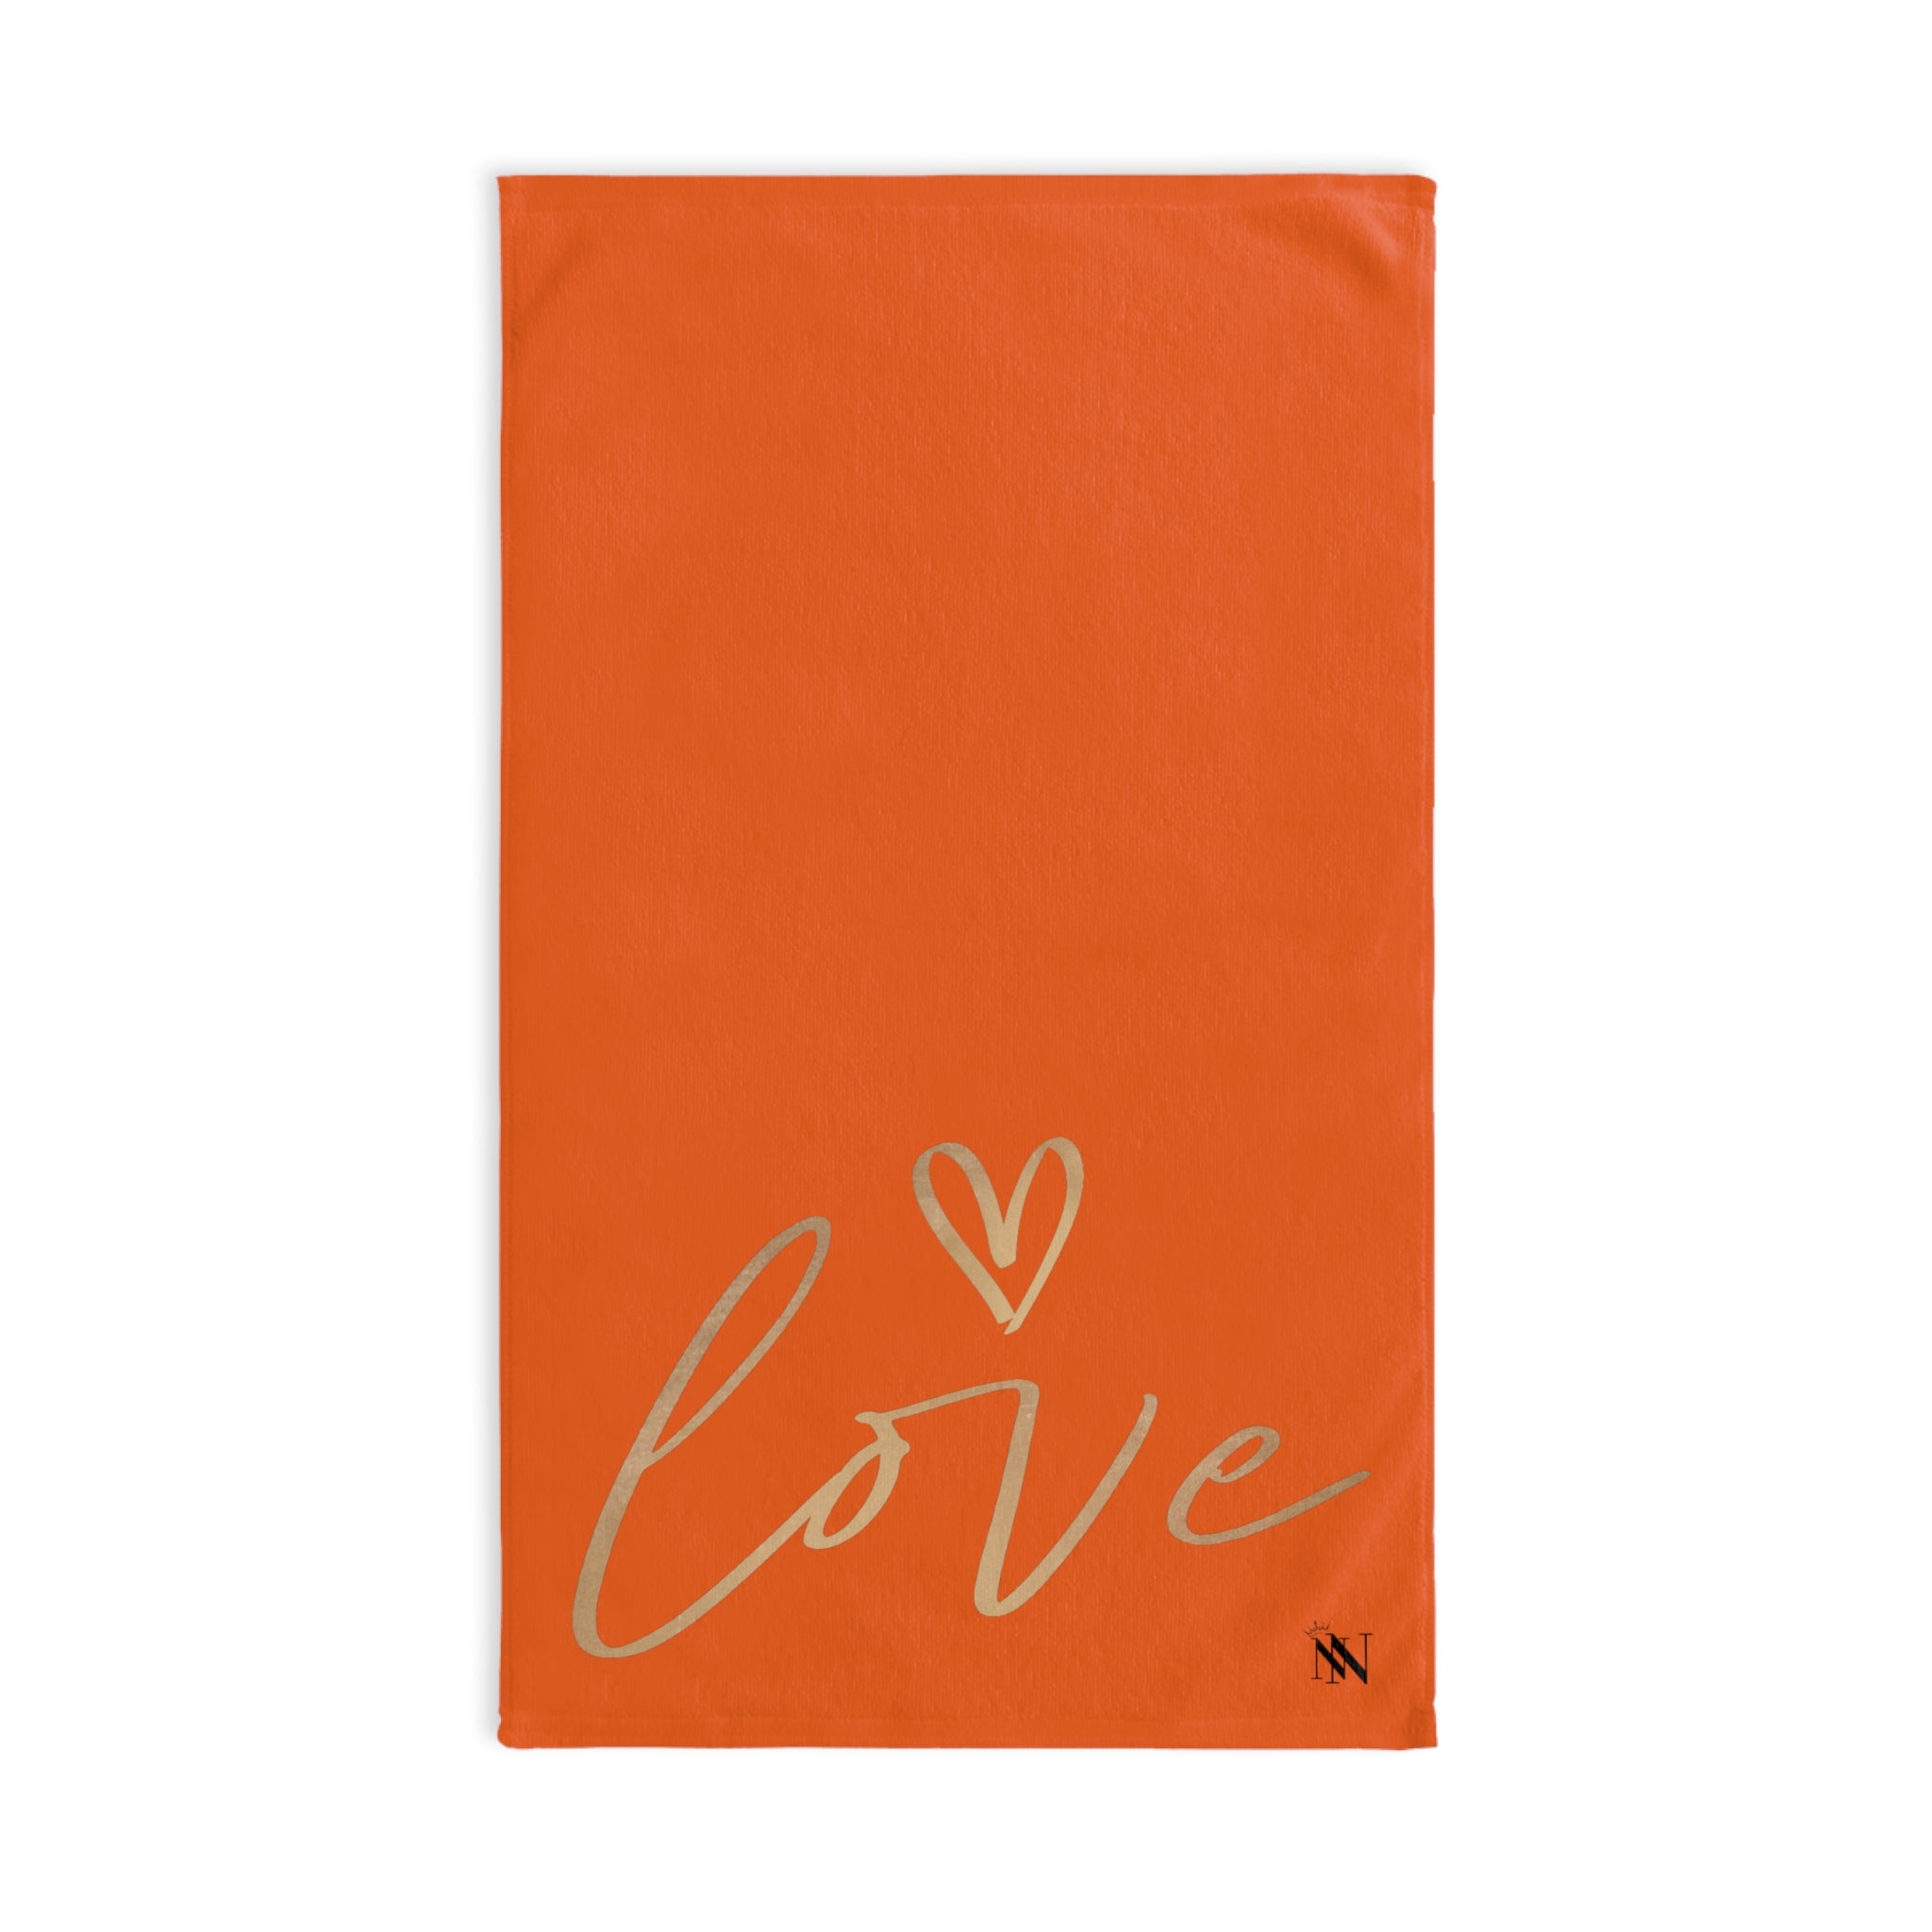 Gold Love Heart Orange | Funny Gifts for Men - Gifts for Him - Birthday Gifts for Men, Him, Husband, Boyfriend, New Couple Gifts, Fathers & Valentines Day Gifts, Hand Towels NECTAR NAPKINS